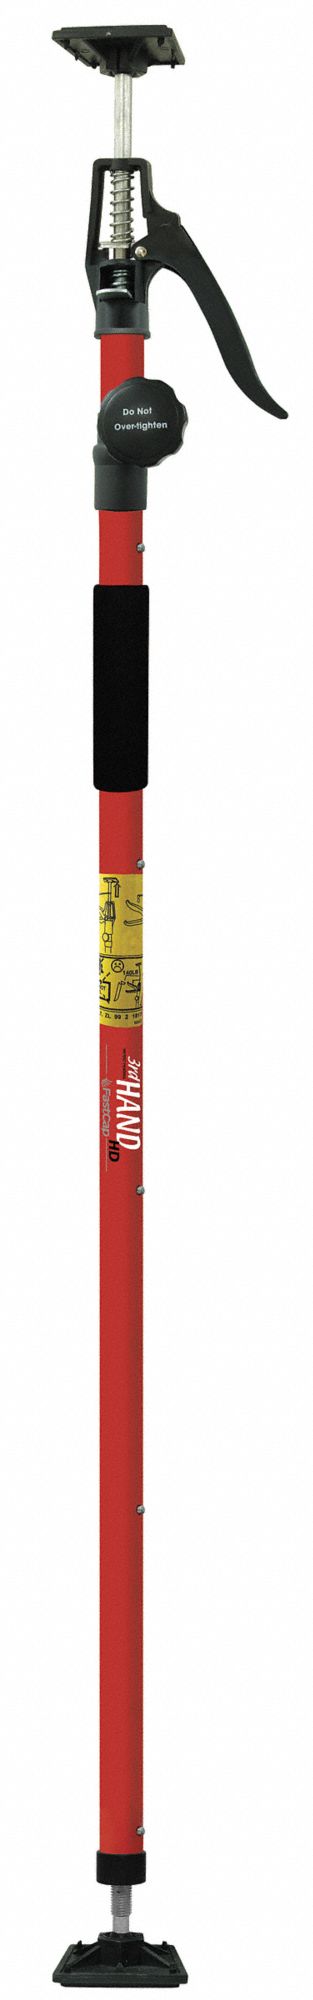 Extendable Utility Pole: Telescoping, 16.5 in Min Extension Ht, 22.8 in Max Extension Ht